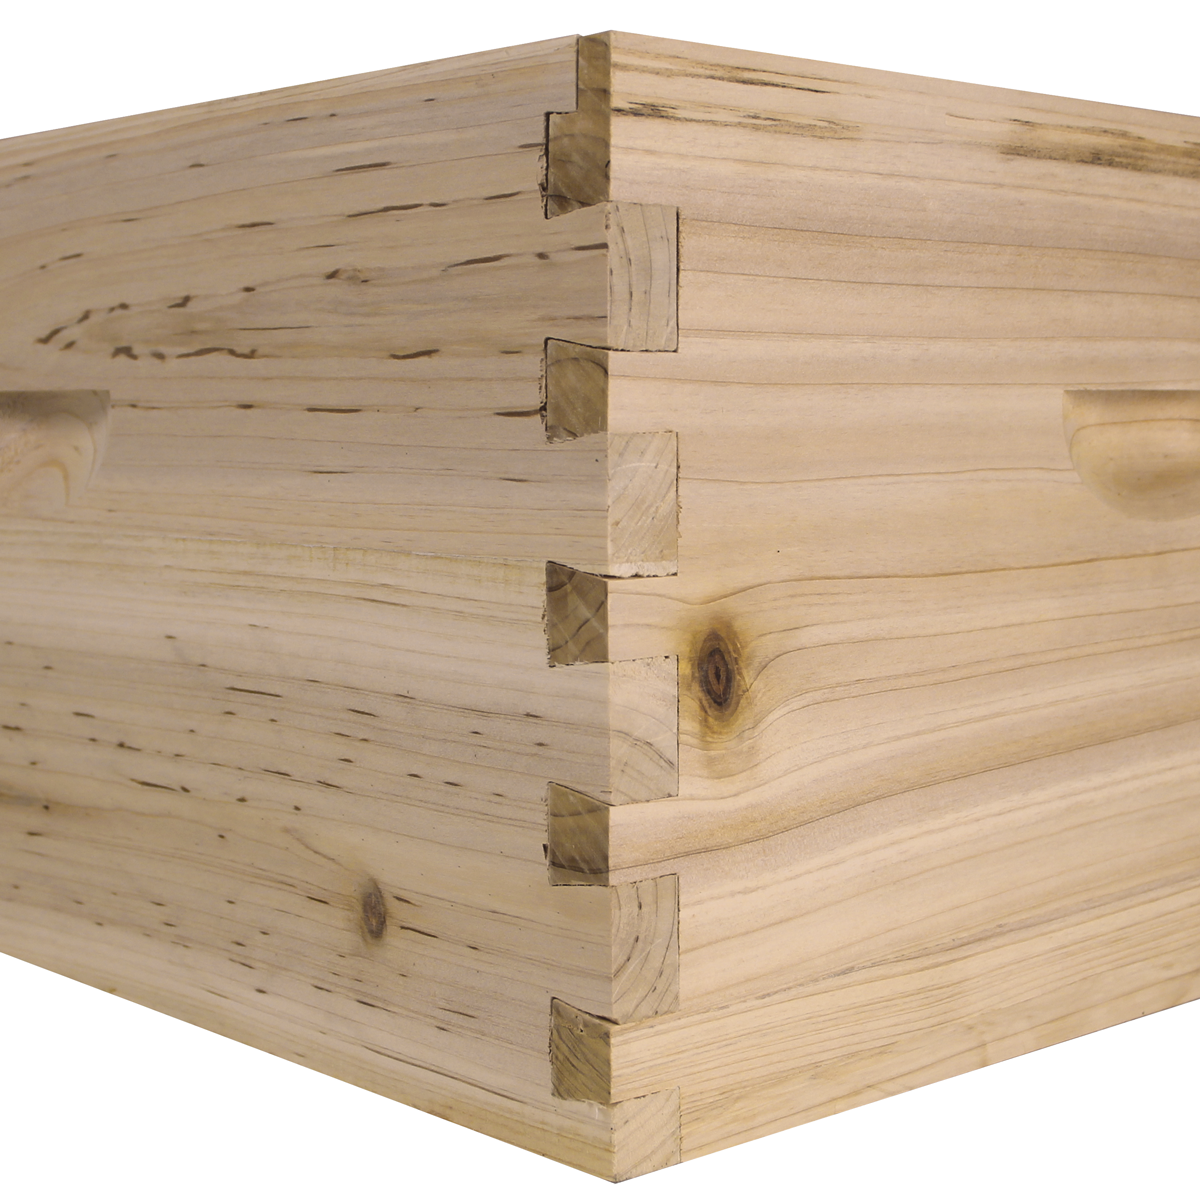 10 Frame Deep Brood Box w/ Dovetail Joints (Box Only, No Frames)